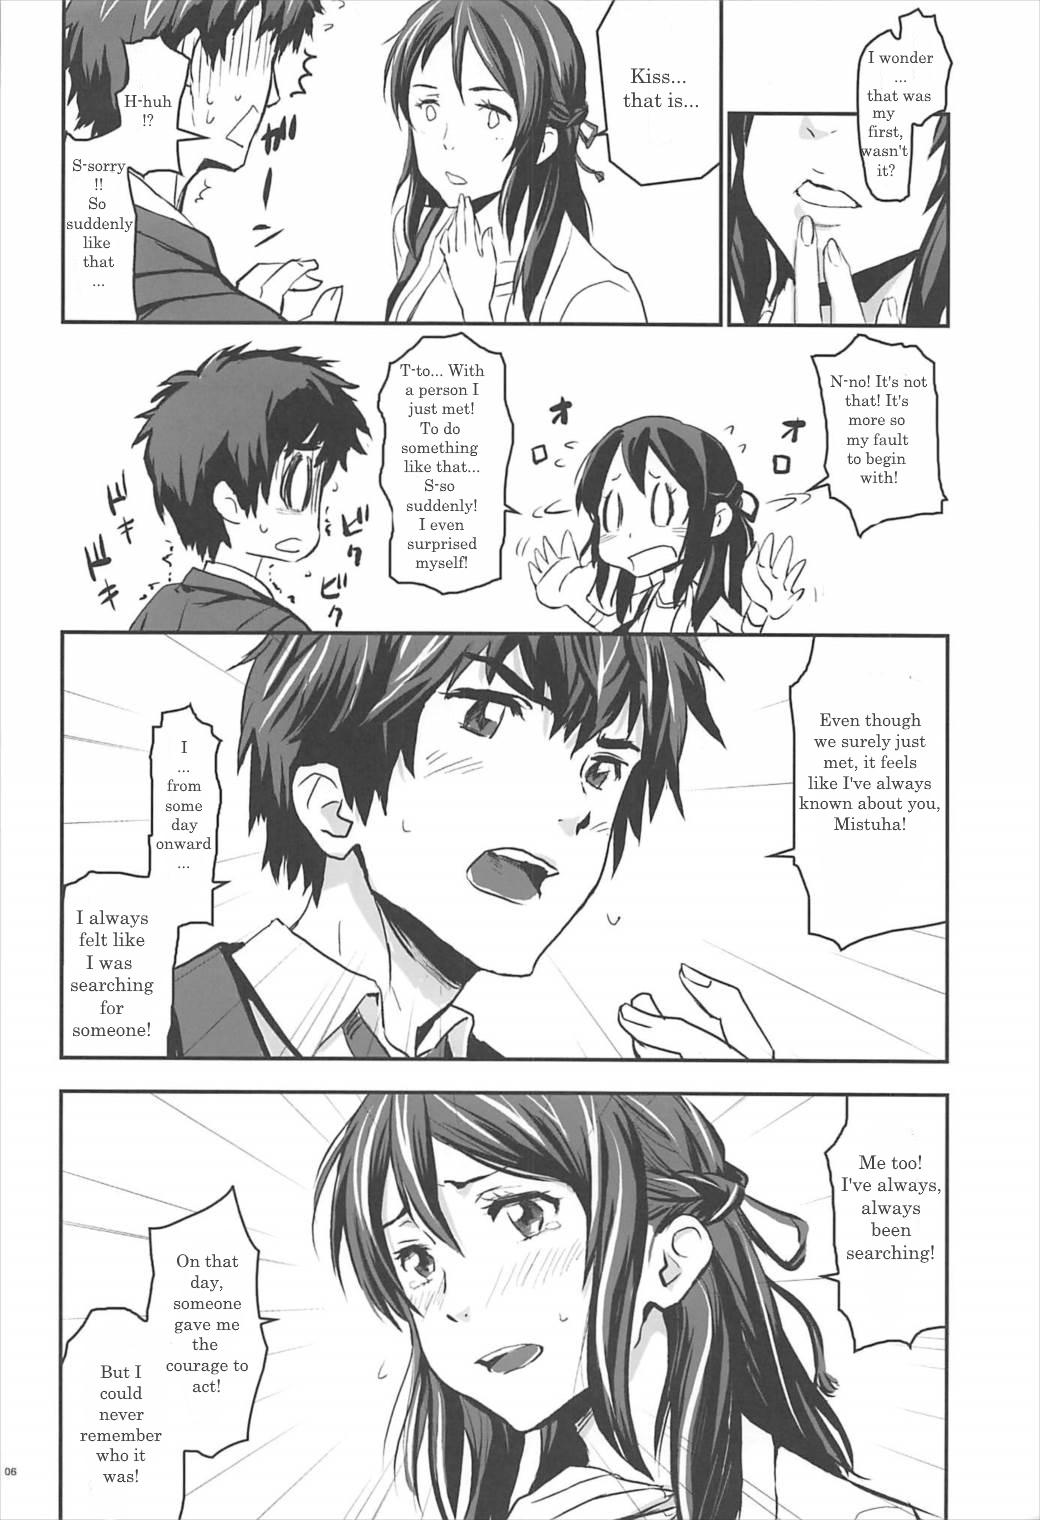 Bubble Butt Your Inside - Kimi no na wa. Pussylick - Page 5